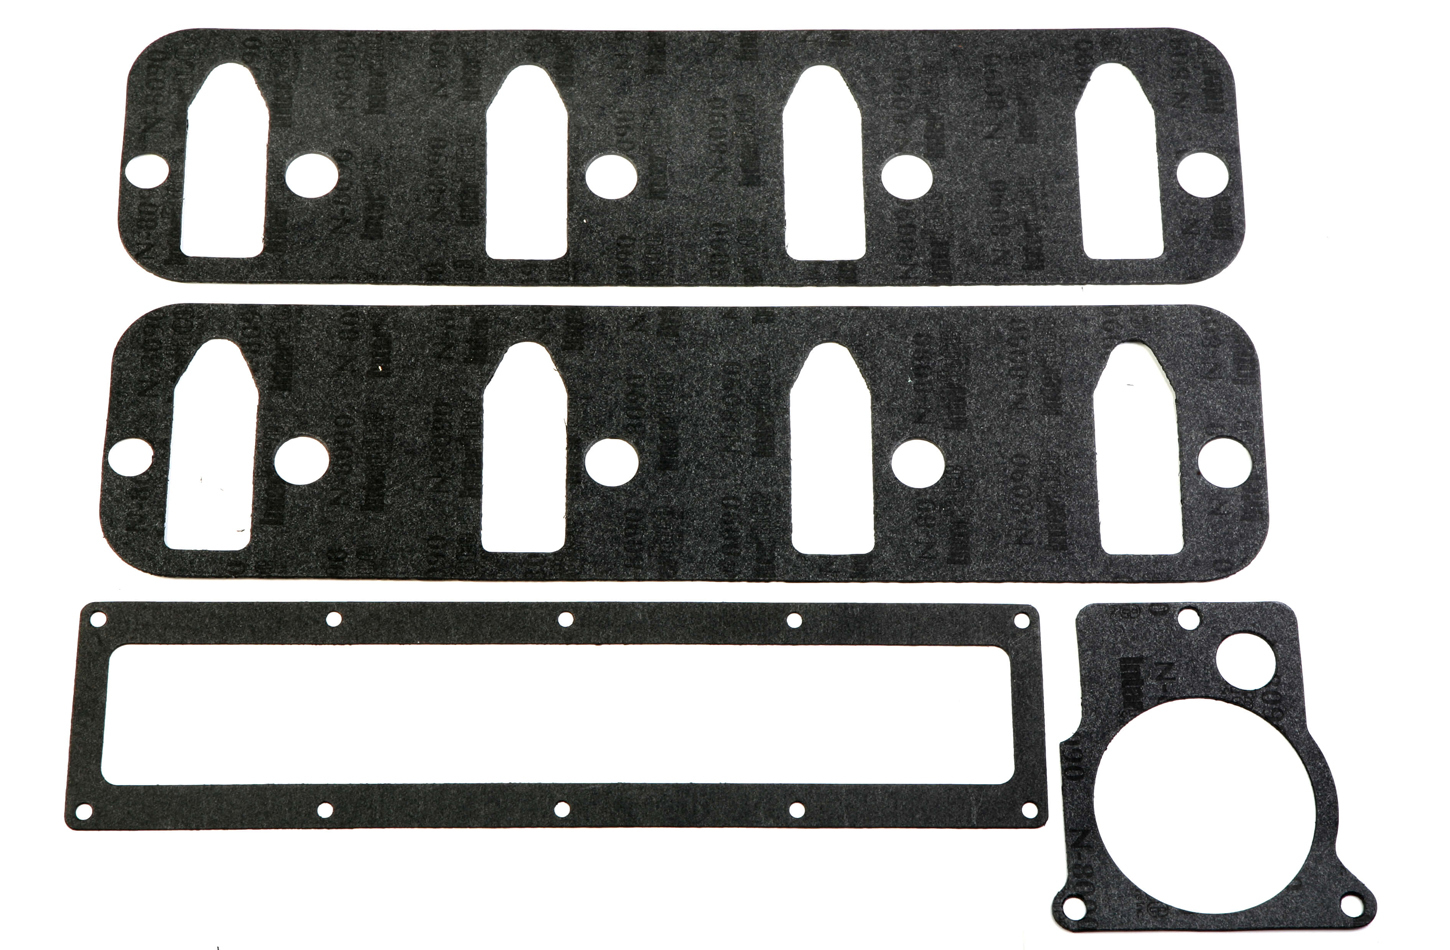 Weiand 108-117 Intake Manifold Gasket, 1.180 x 3.300 in Cathedral Port, Composite, LS1, GM LS-Series, Kit